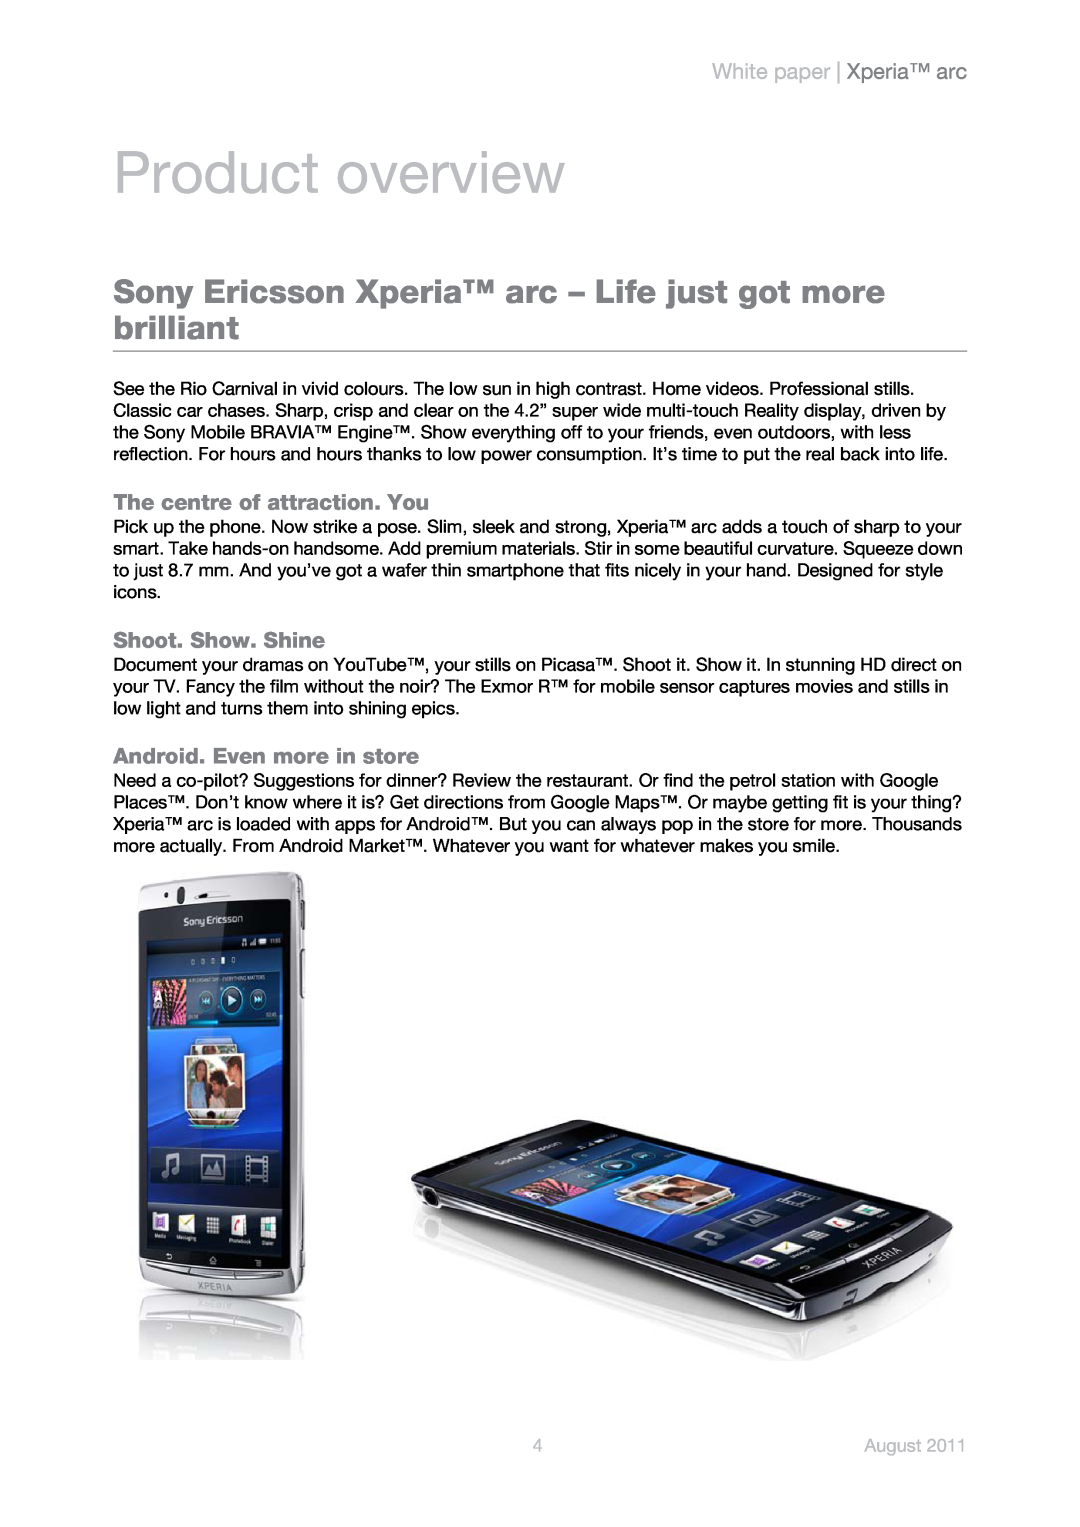 Sony Ericsson LT15a Product overview, Sony Ericsson Xperia arc - Life just got more brilliant, Shoot. Show. Shine, August 